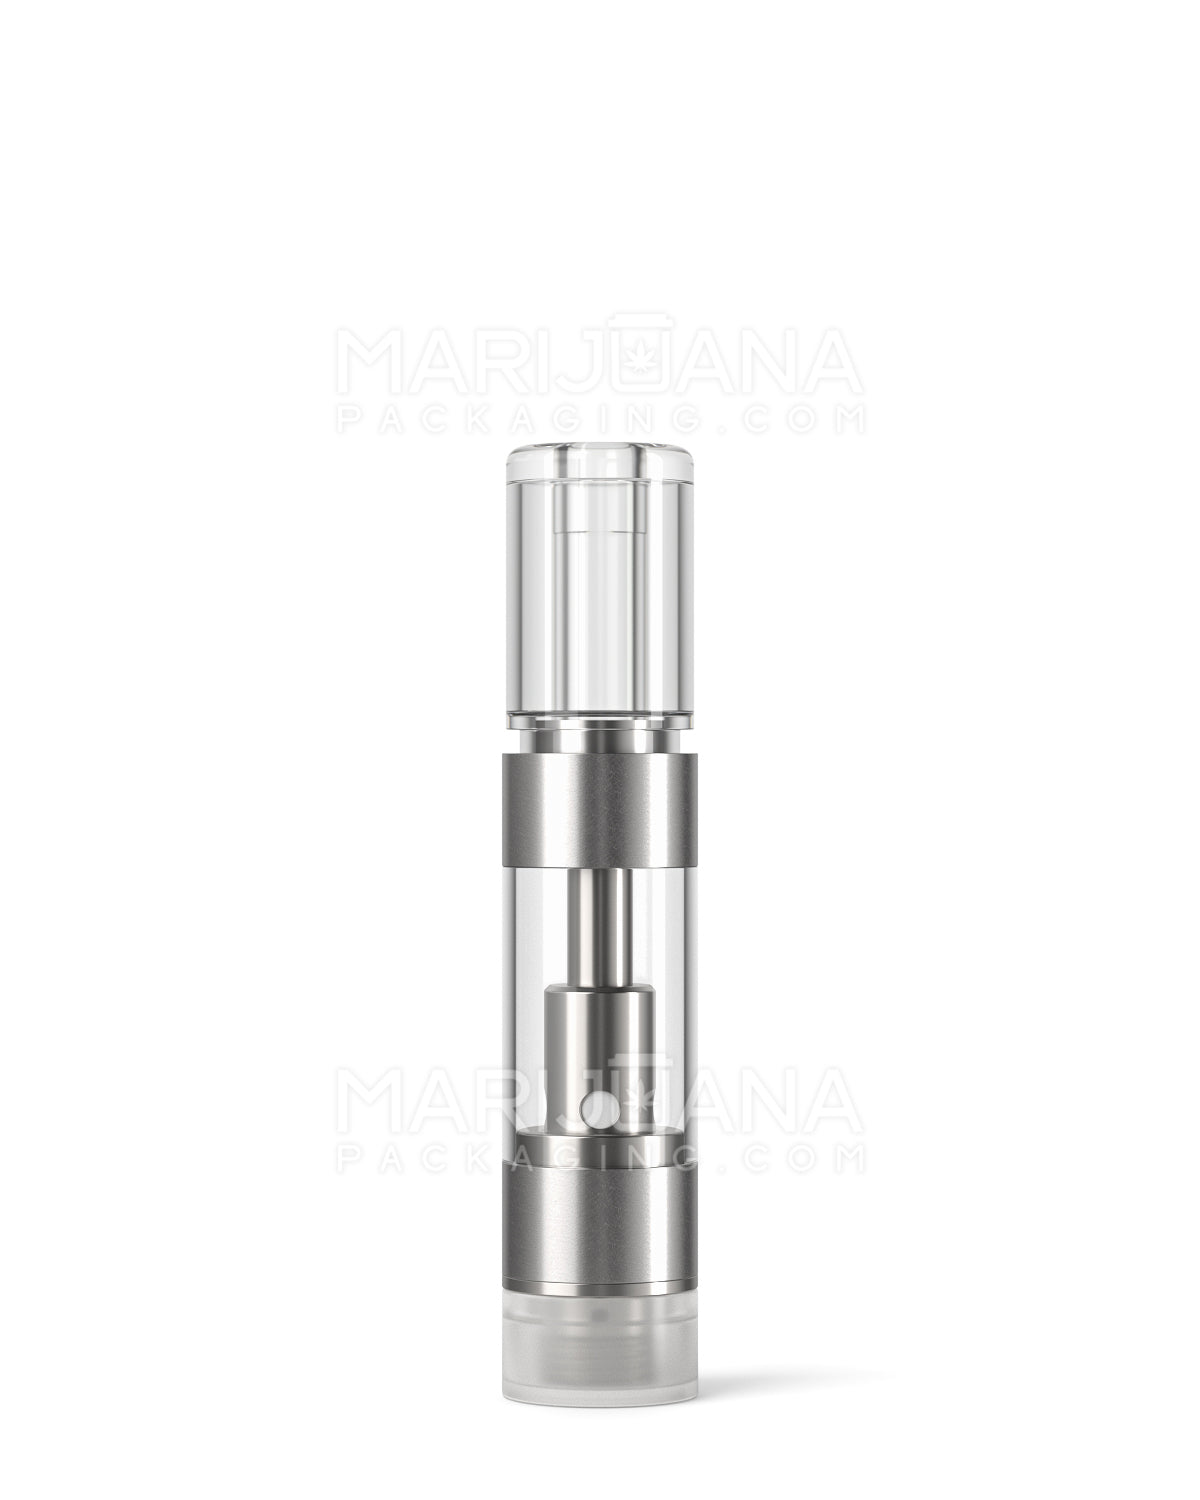 CCELL | Liquid6 Reactor Plastic Vape Cartridge with Barrel Clear Plastic Mouthpiece | 0.5mL - Press On - 100 Count - 3